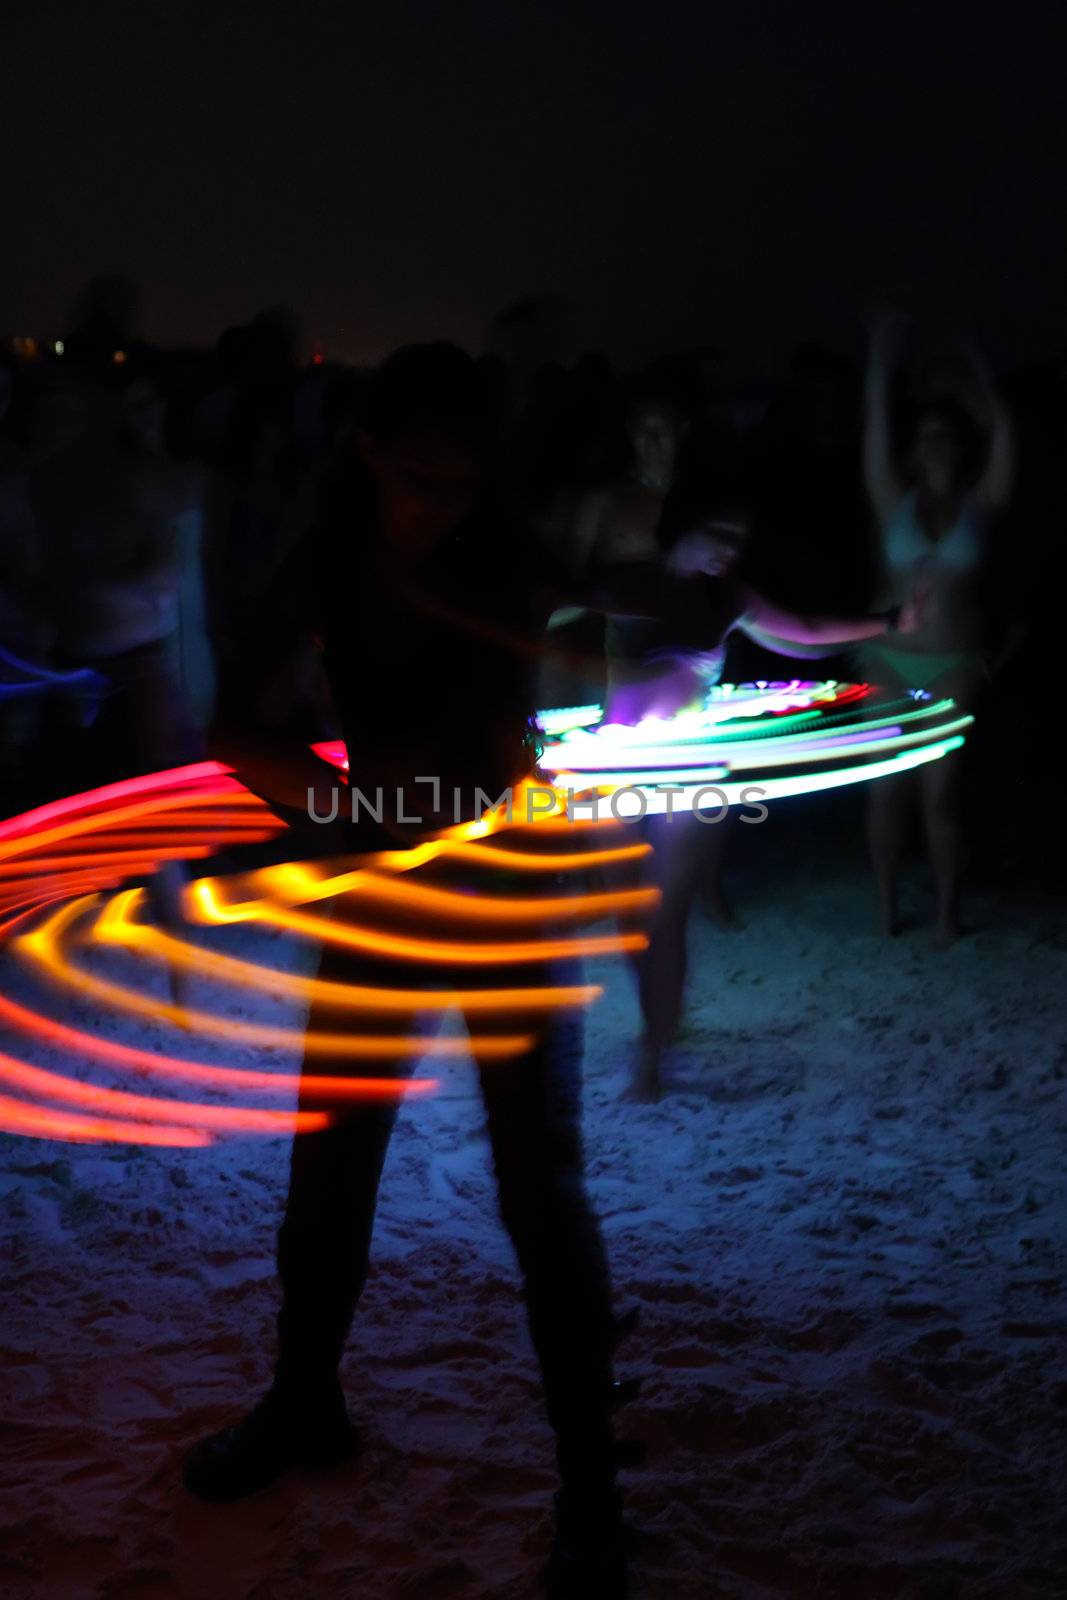 SIESTA KEY, FLORIDA - MAY 22: Dancers twirling colored lights are seen as silhouettes at a drum circle on Siesta Key Public Beach near Sarasota, Florida, May 22, 2011.  A slow shutter speed gives motion blur to the dancers and colored lights as they whirl on the sand.